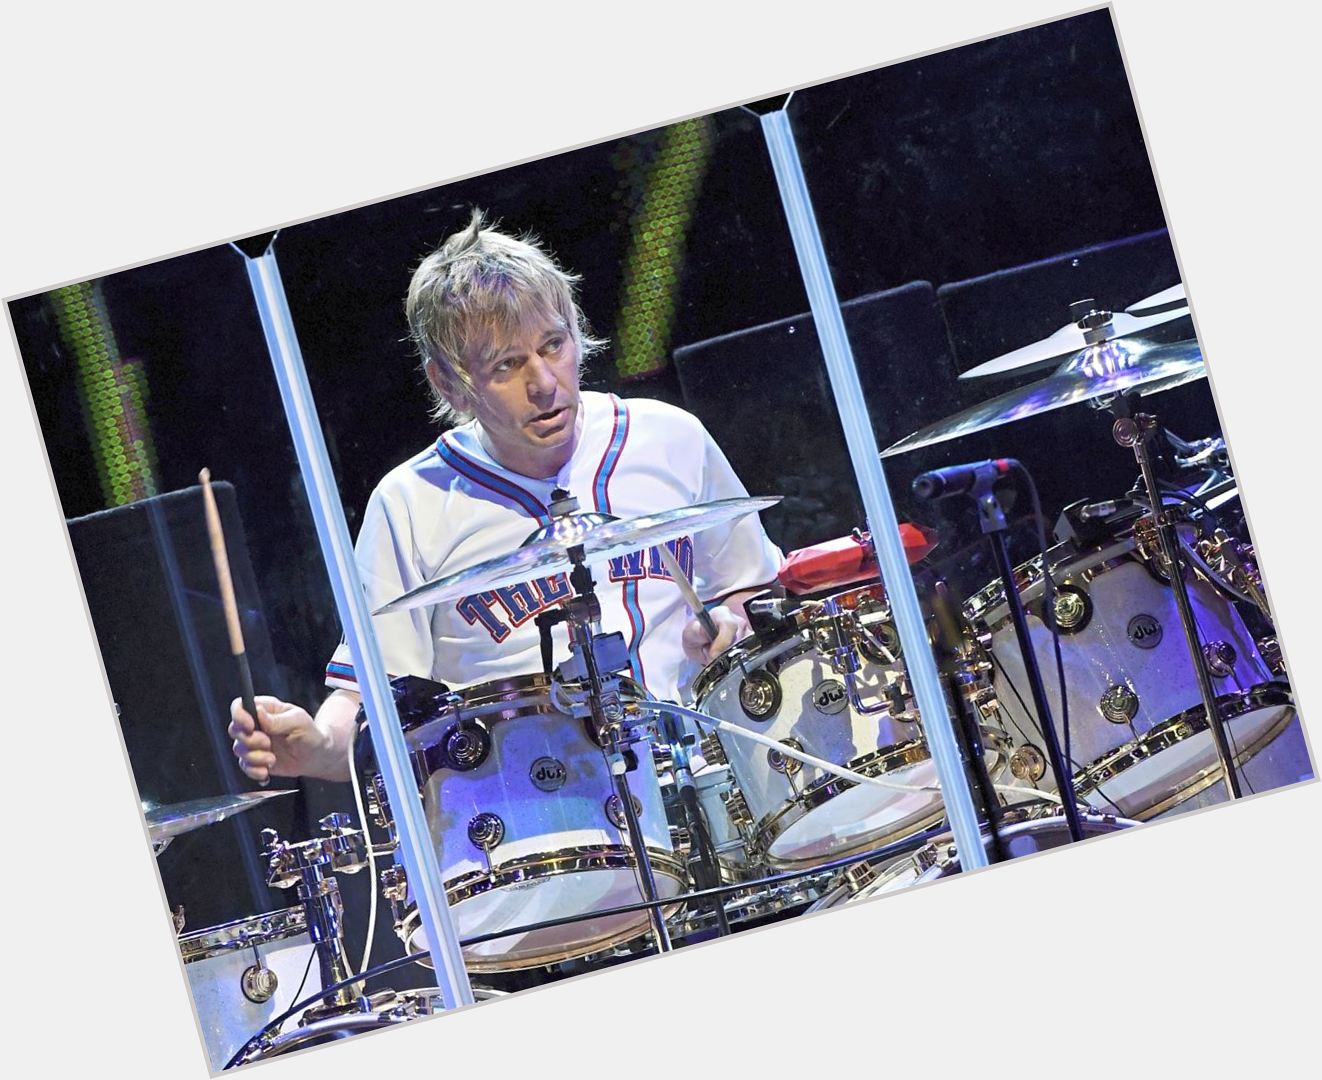 Happy Birthday to Zak Starkey, 56 today. A fantastic drummer with The Who and son to Ringo Star. 